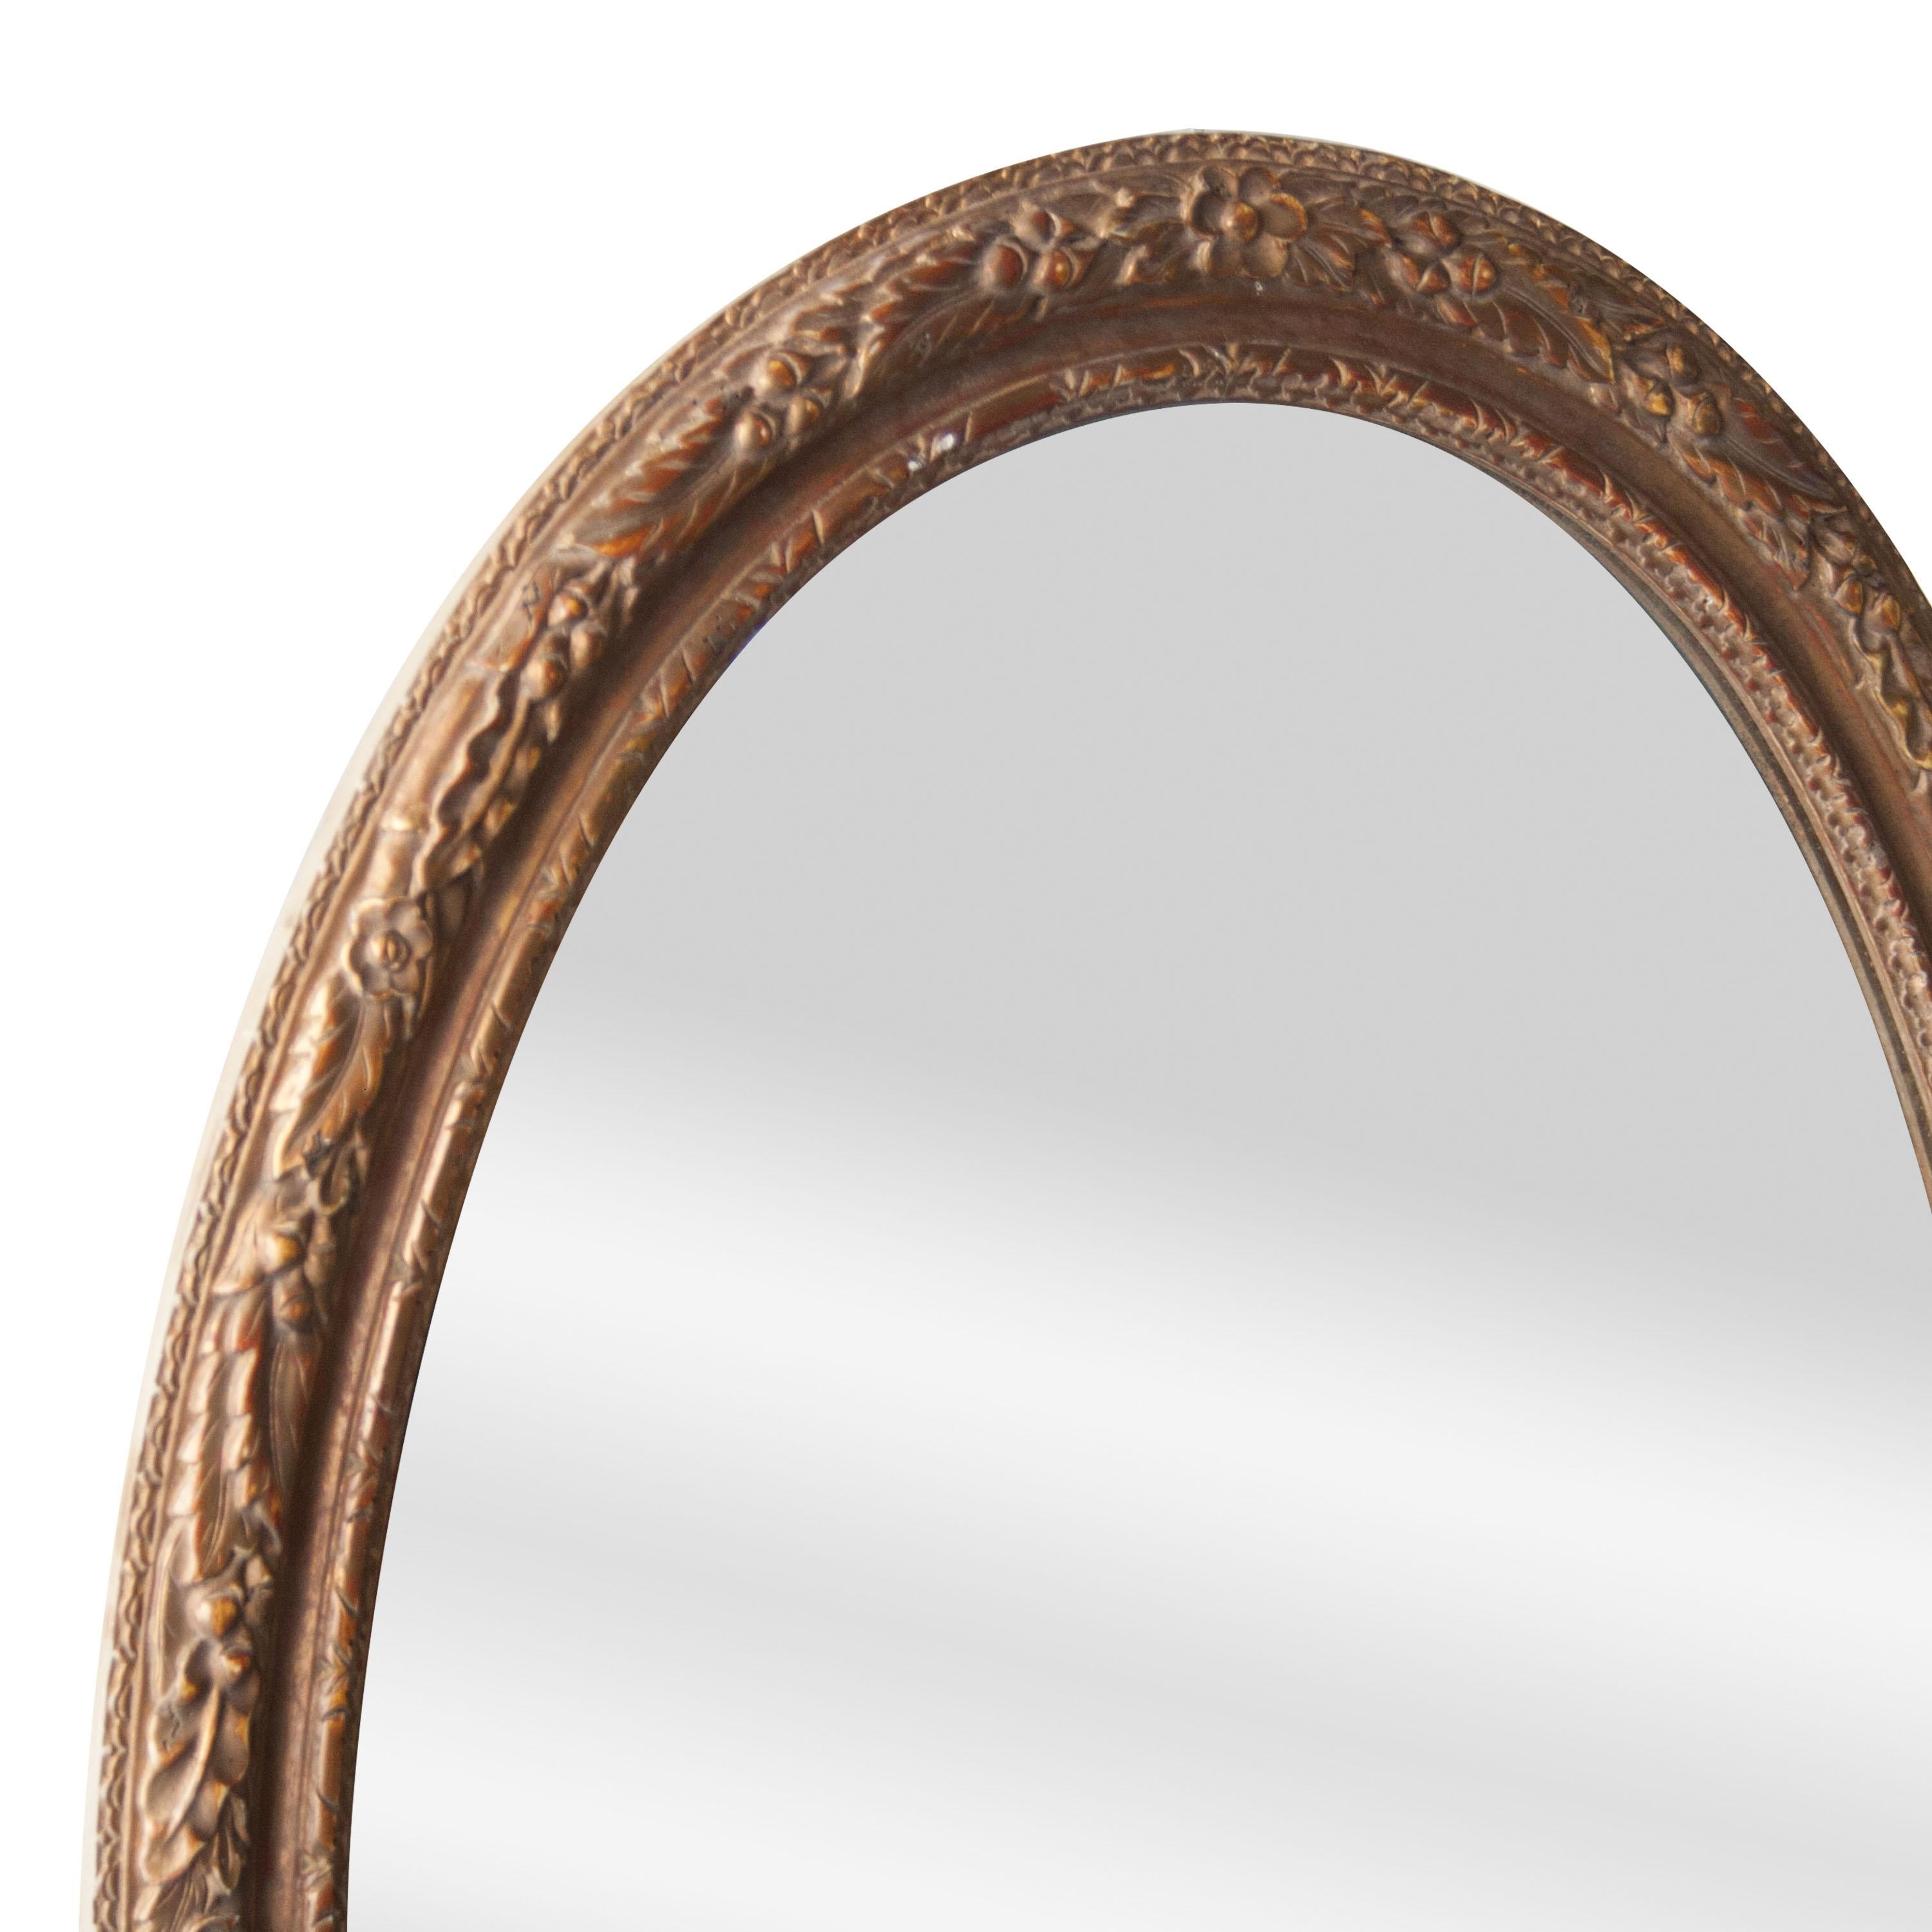 Neoclassical Revival Neoclassical Empire Oval Gold Hand Carved Wooden Mirror, Spain, 1970 For Sale